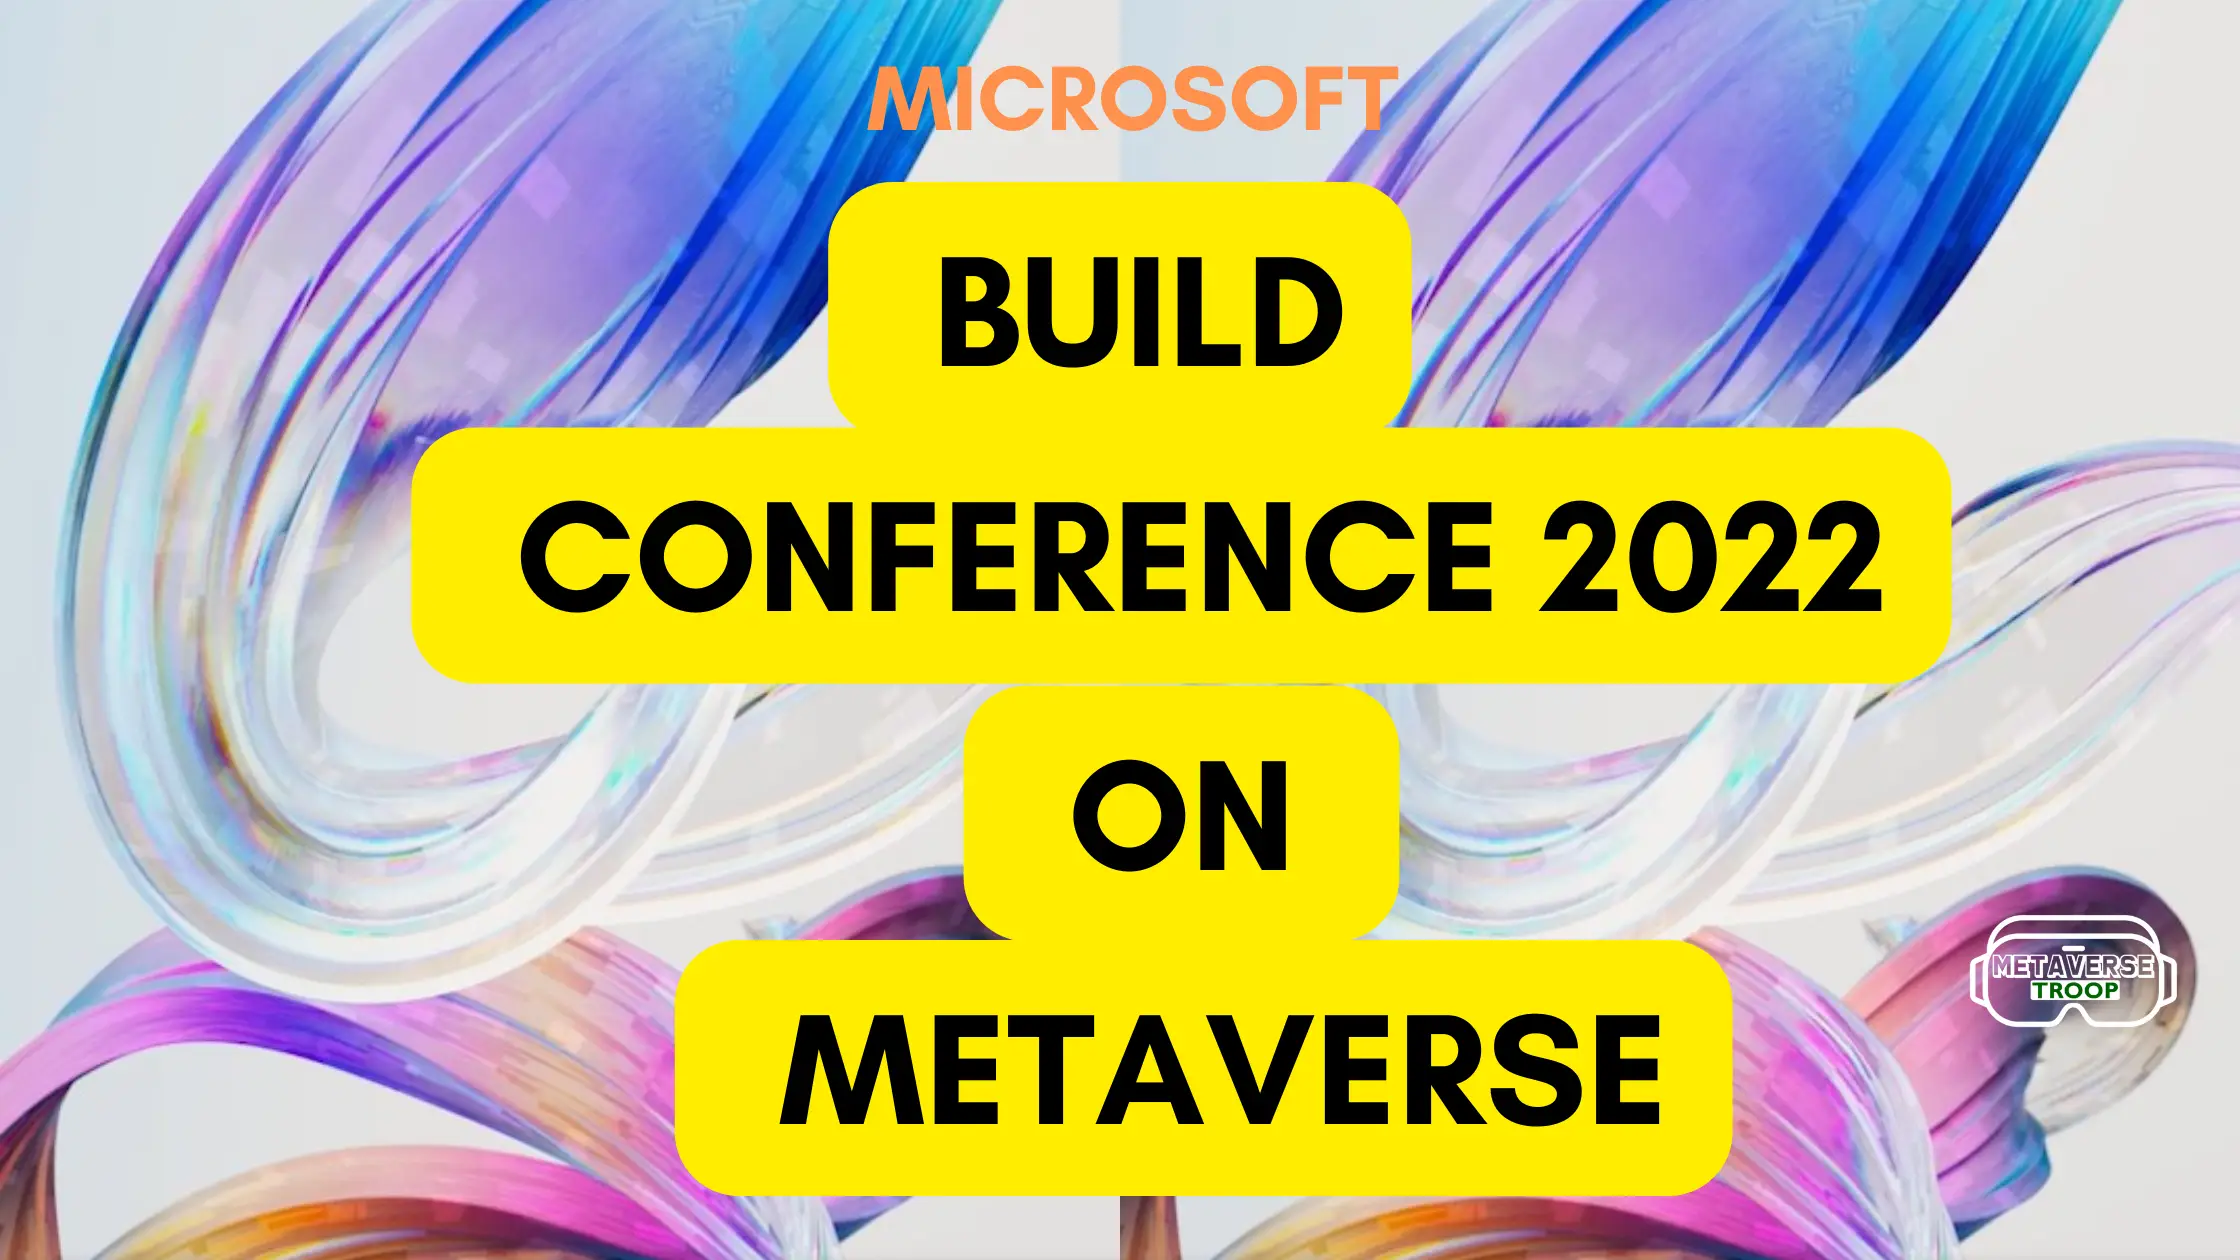 MICROSOFT BUILD CONFERENCE 2022 ON METAVERSE